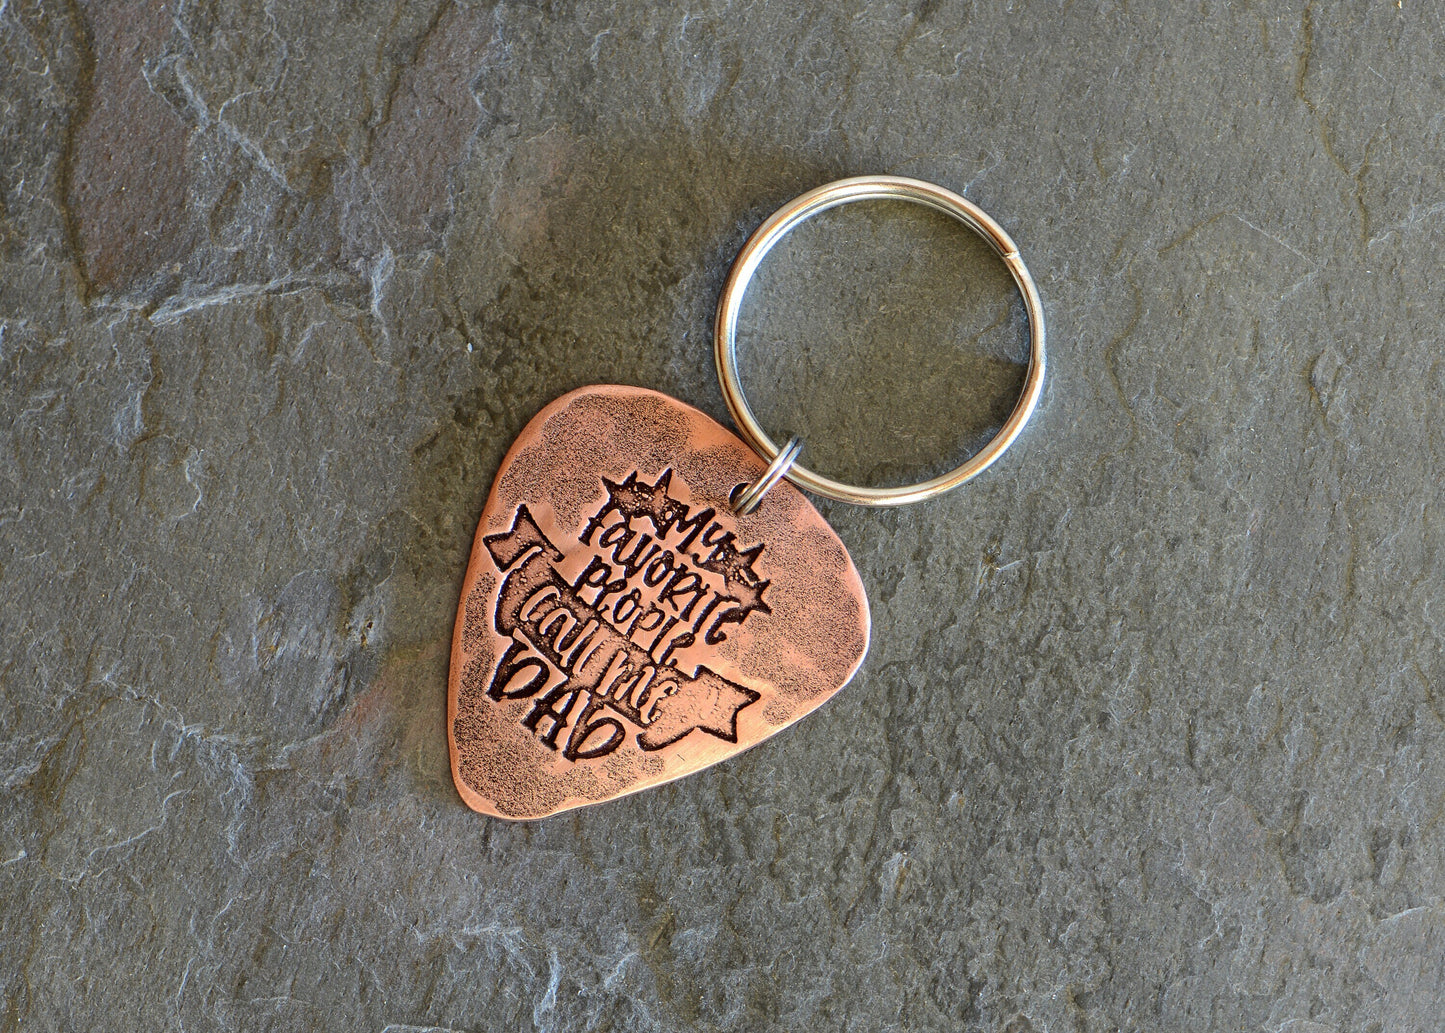 Guitar pick copper key ring with my favorite people call me dad